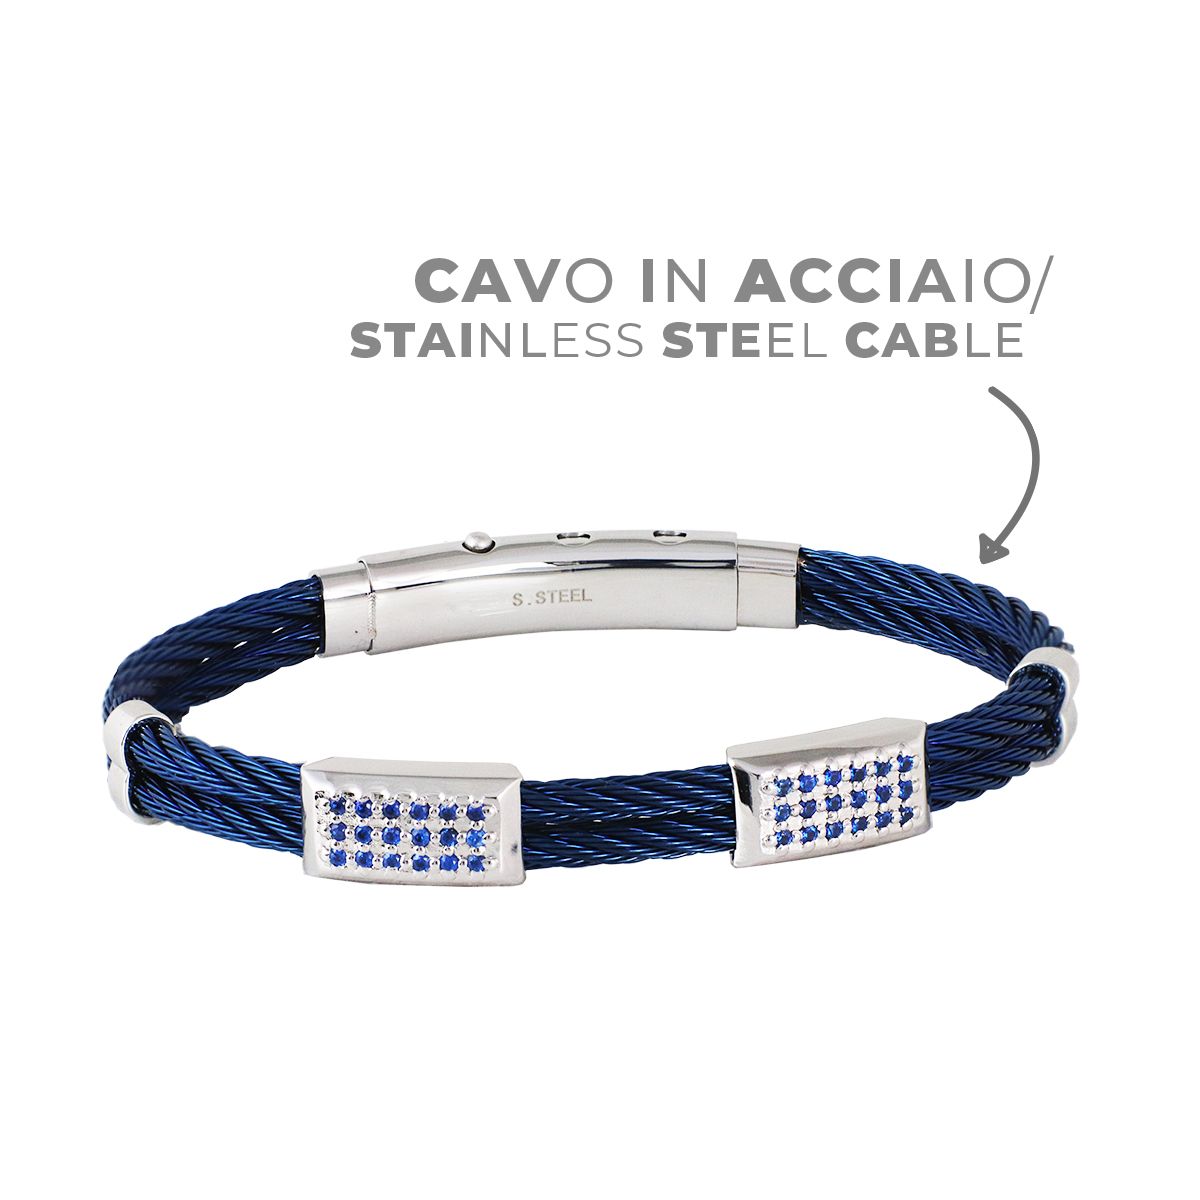 cavo in acciaio - stainless steel cable